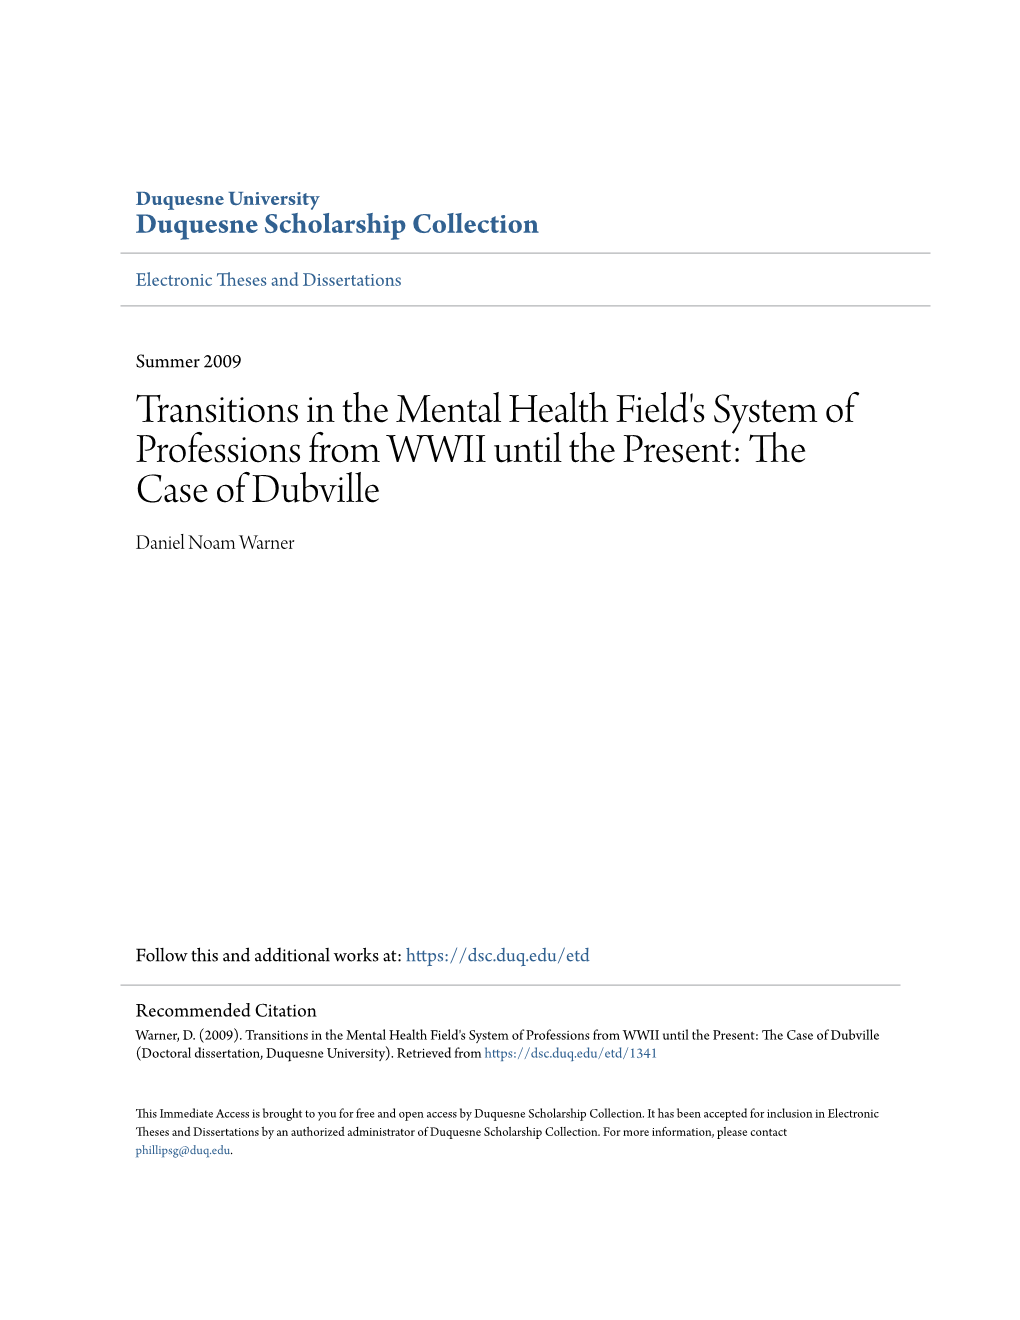 Transitions in the Mental Health Field's System of Professions from WWII Until the Present: the Case of Dubville Daniel Noam Warner